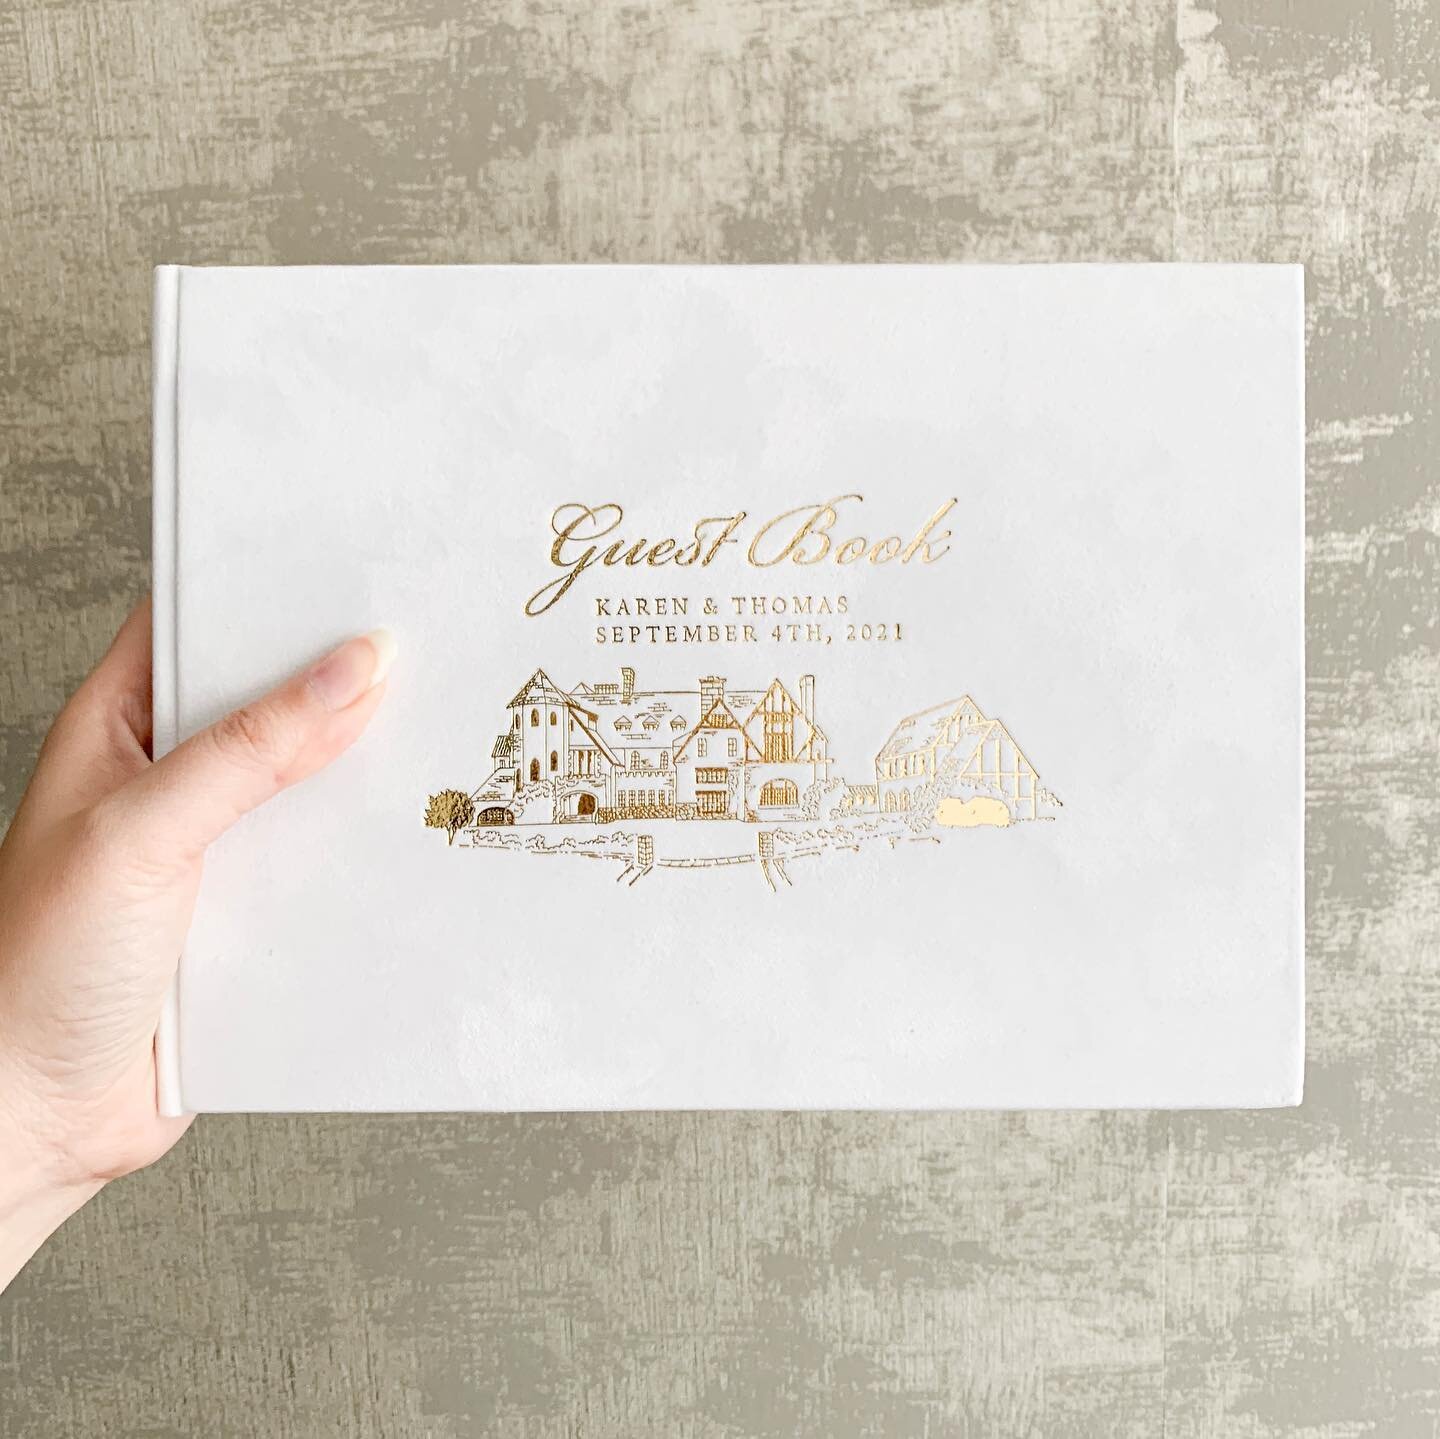 Matching Guest Book? Yes, please!